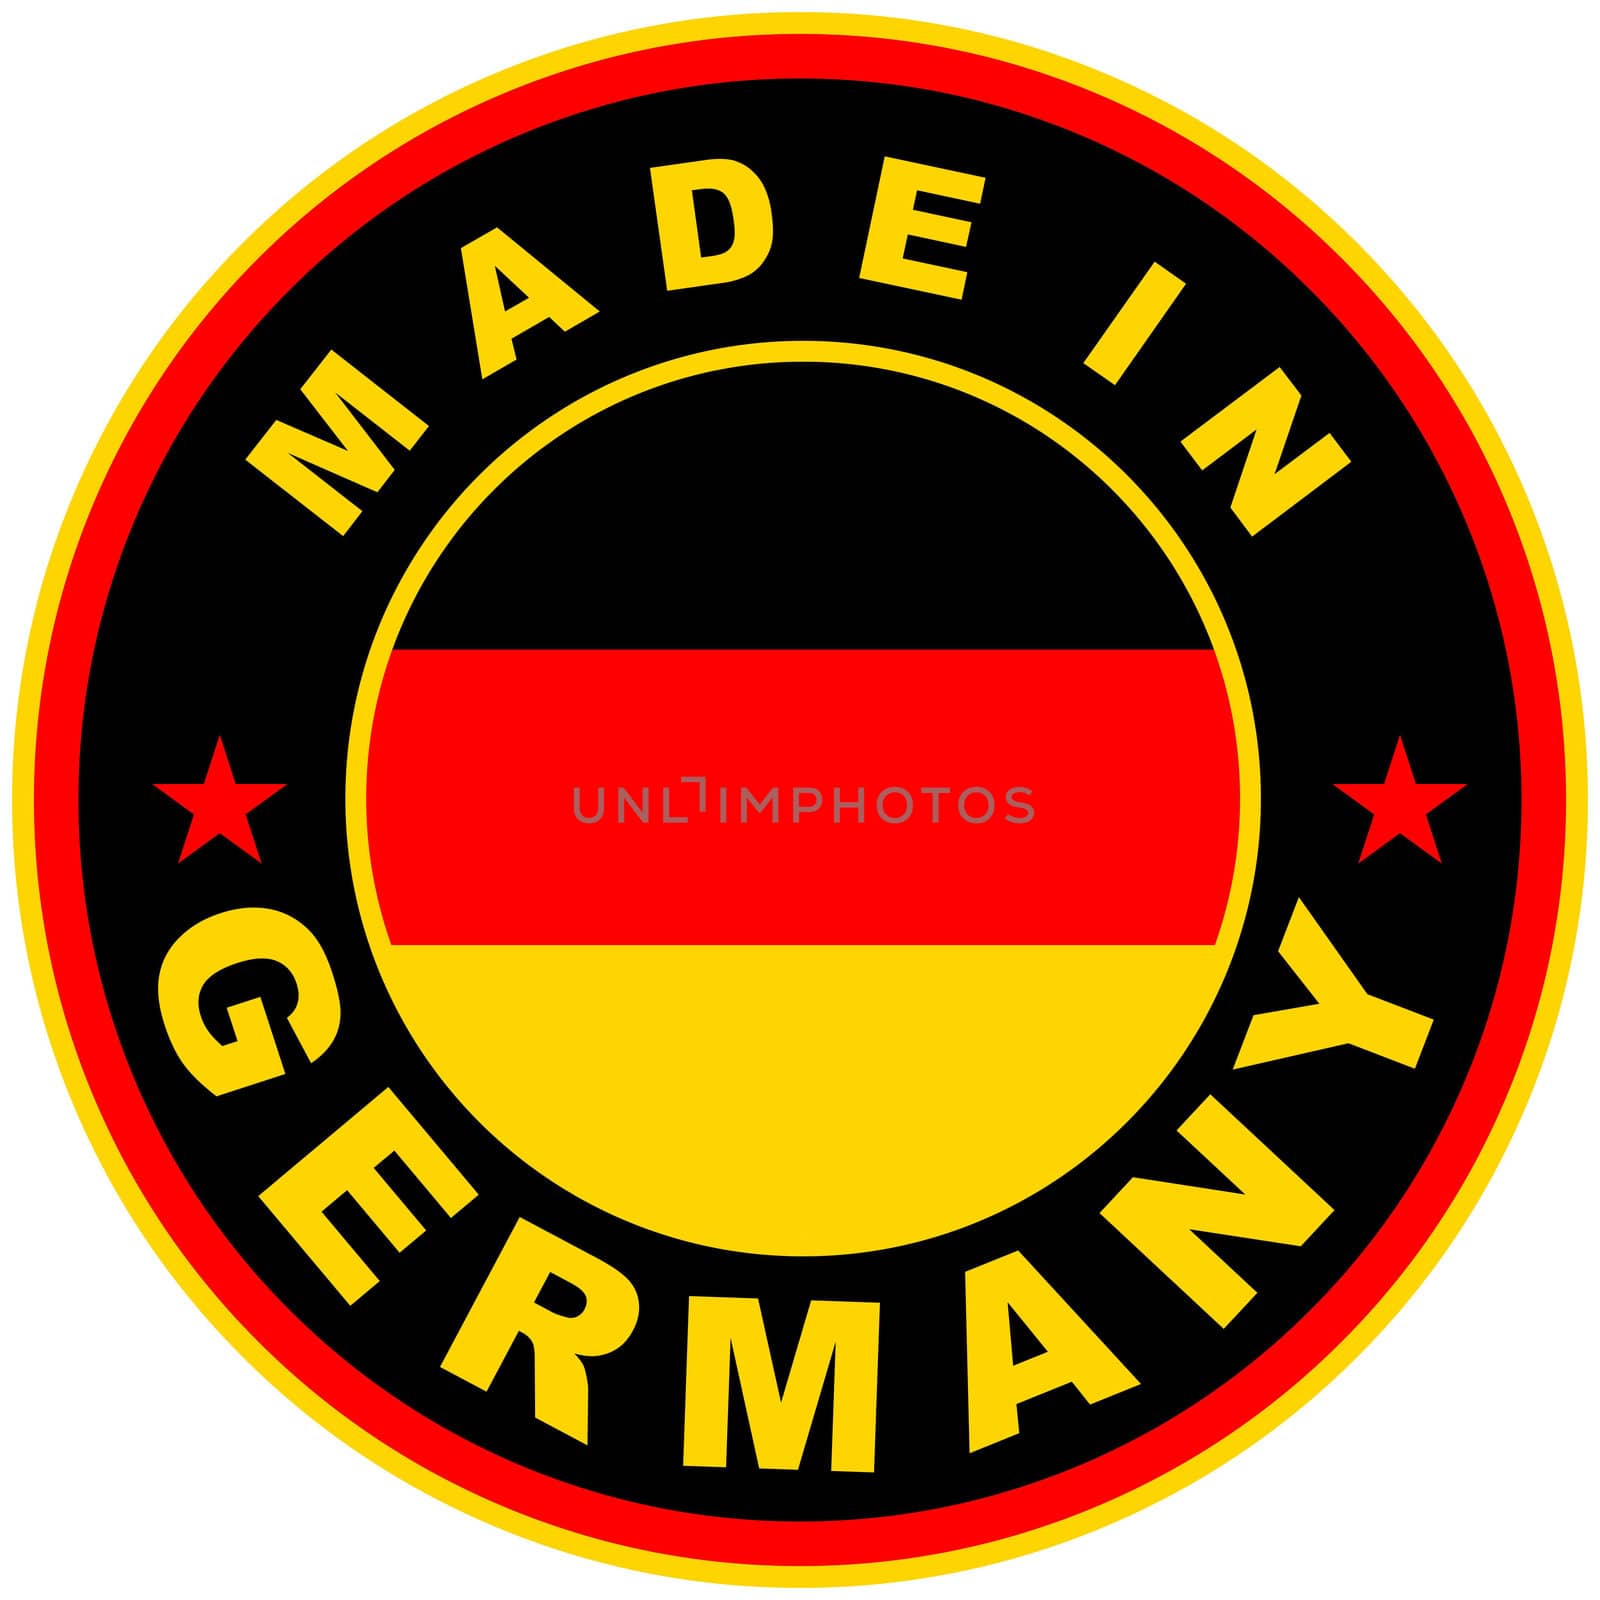 very big size made in germany country label